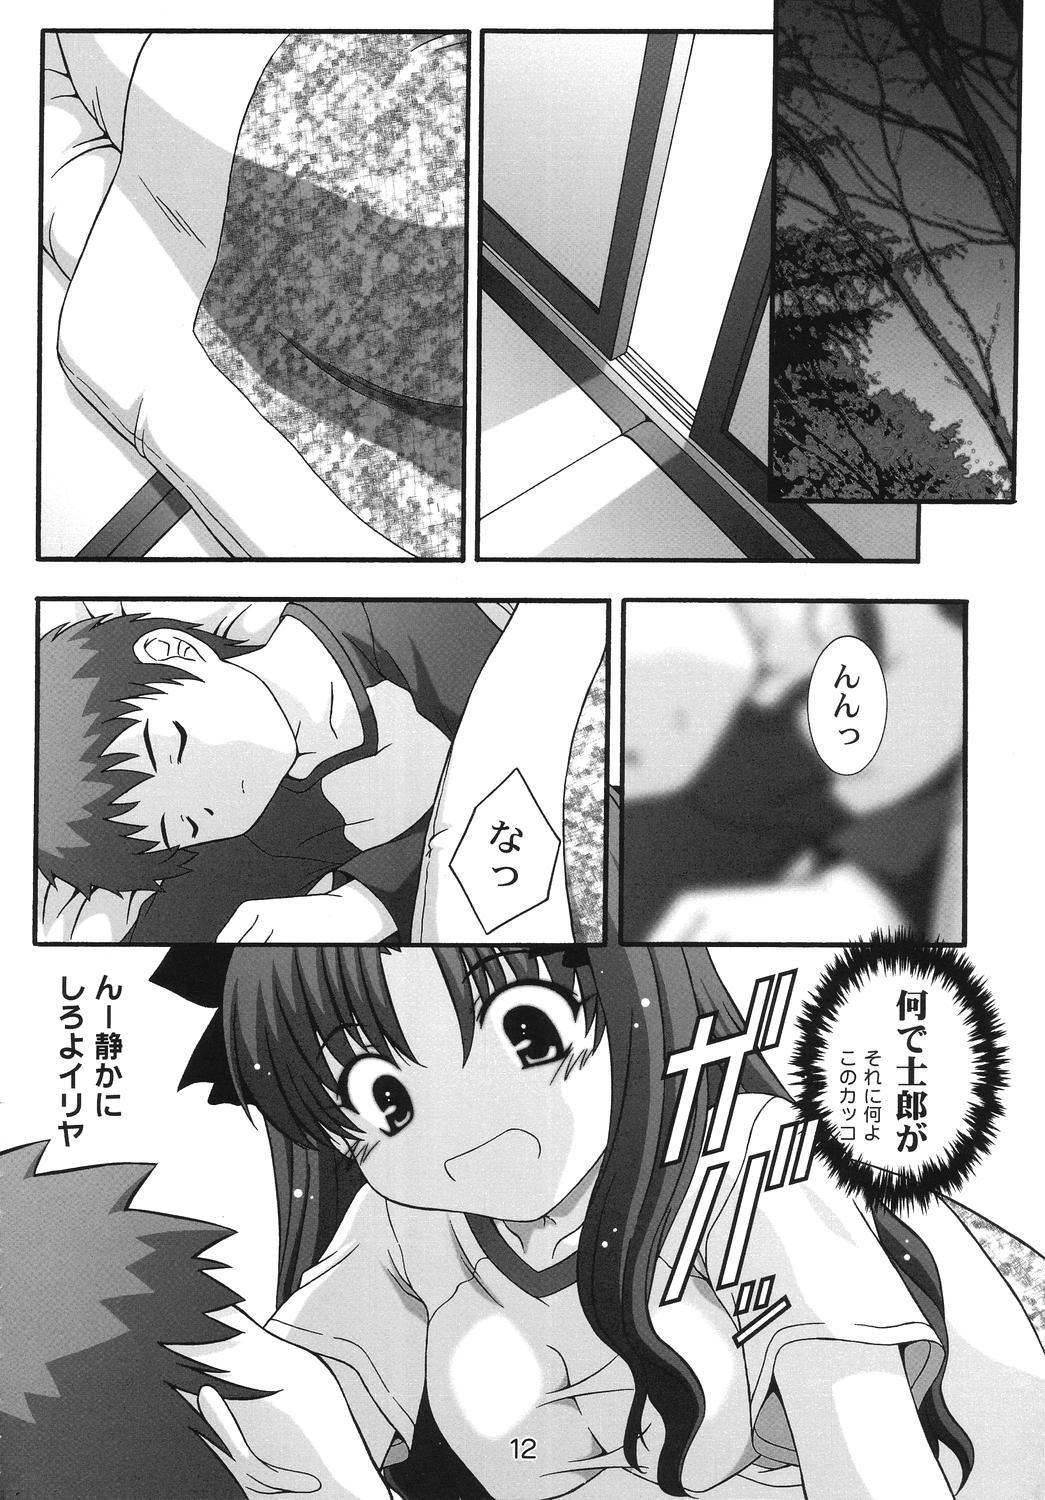 Viet SECRET FILE NEXT 11 - Fate is capricious - Fate stay night Footjob - Page 11